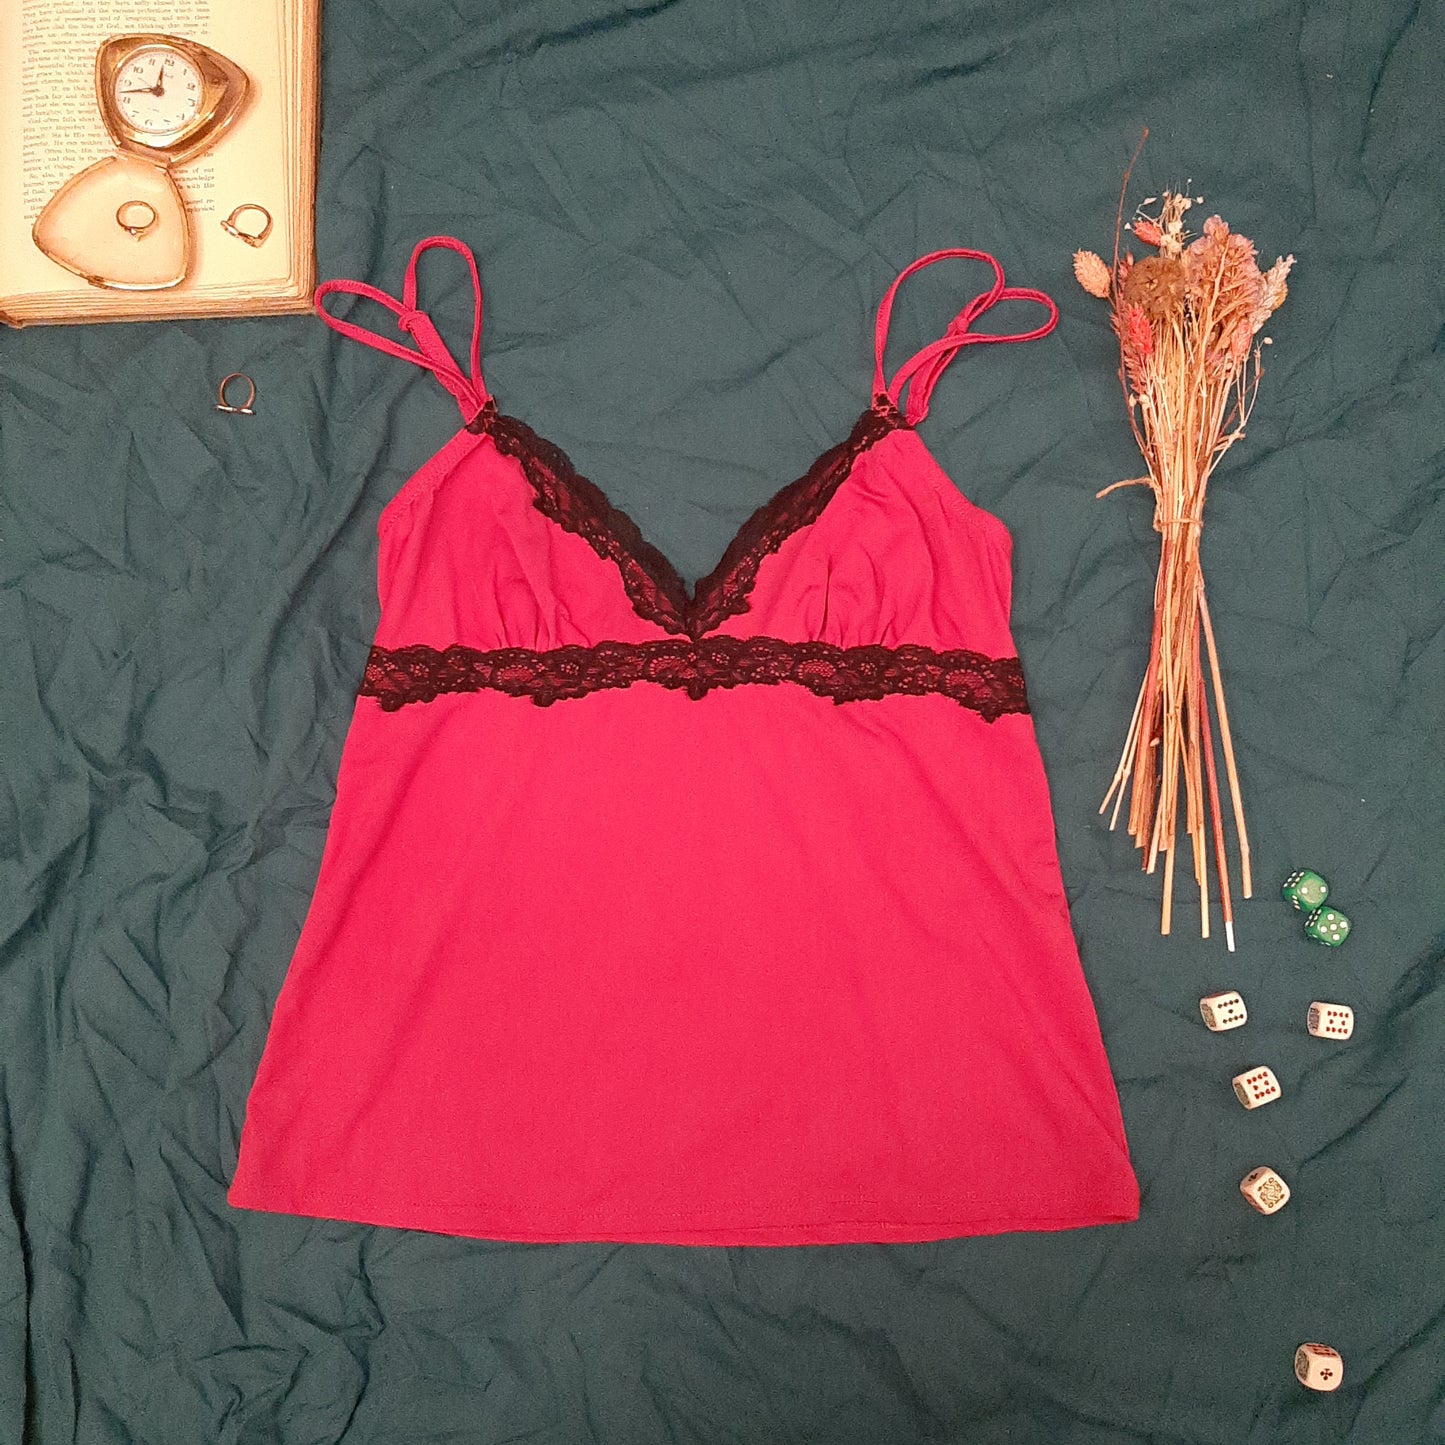 Electric pink tank and black lace trim